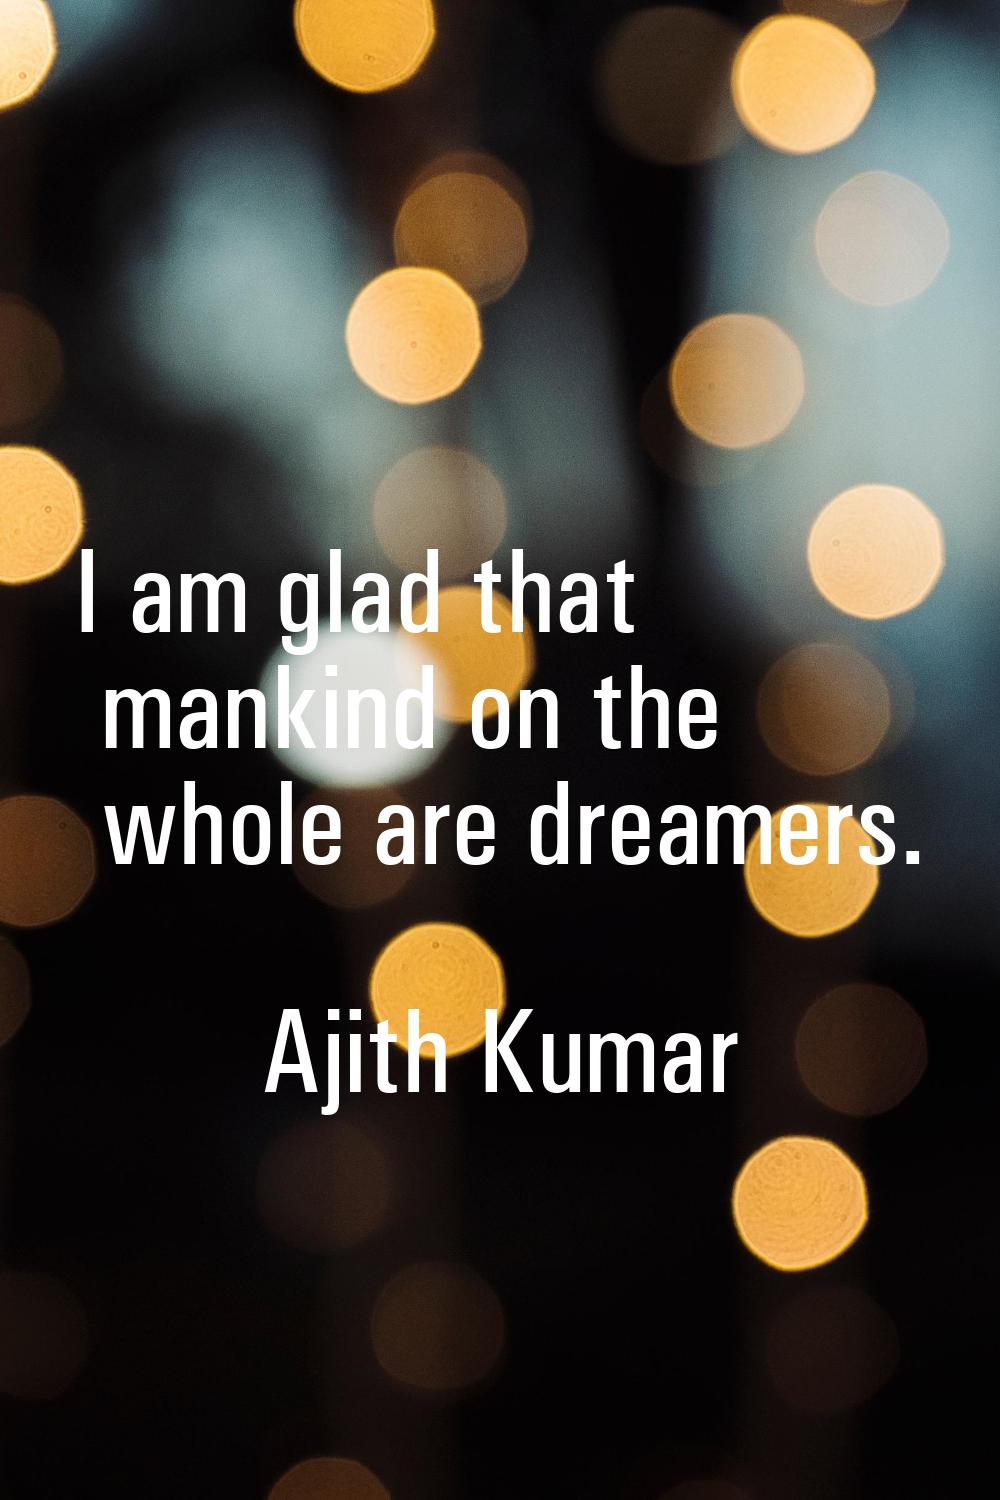 I am glad that mankind on the whole are dreamers.